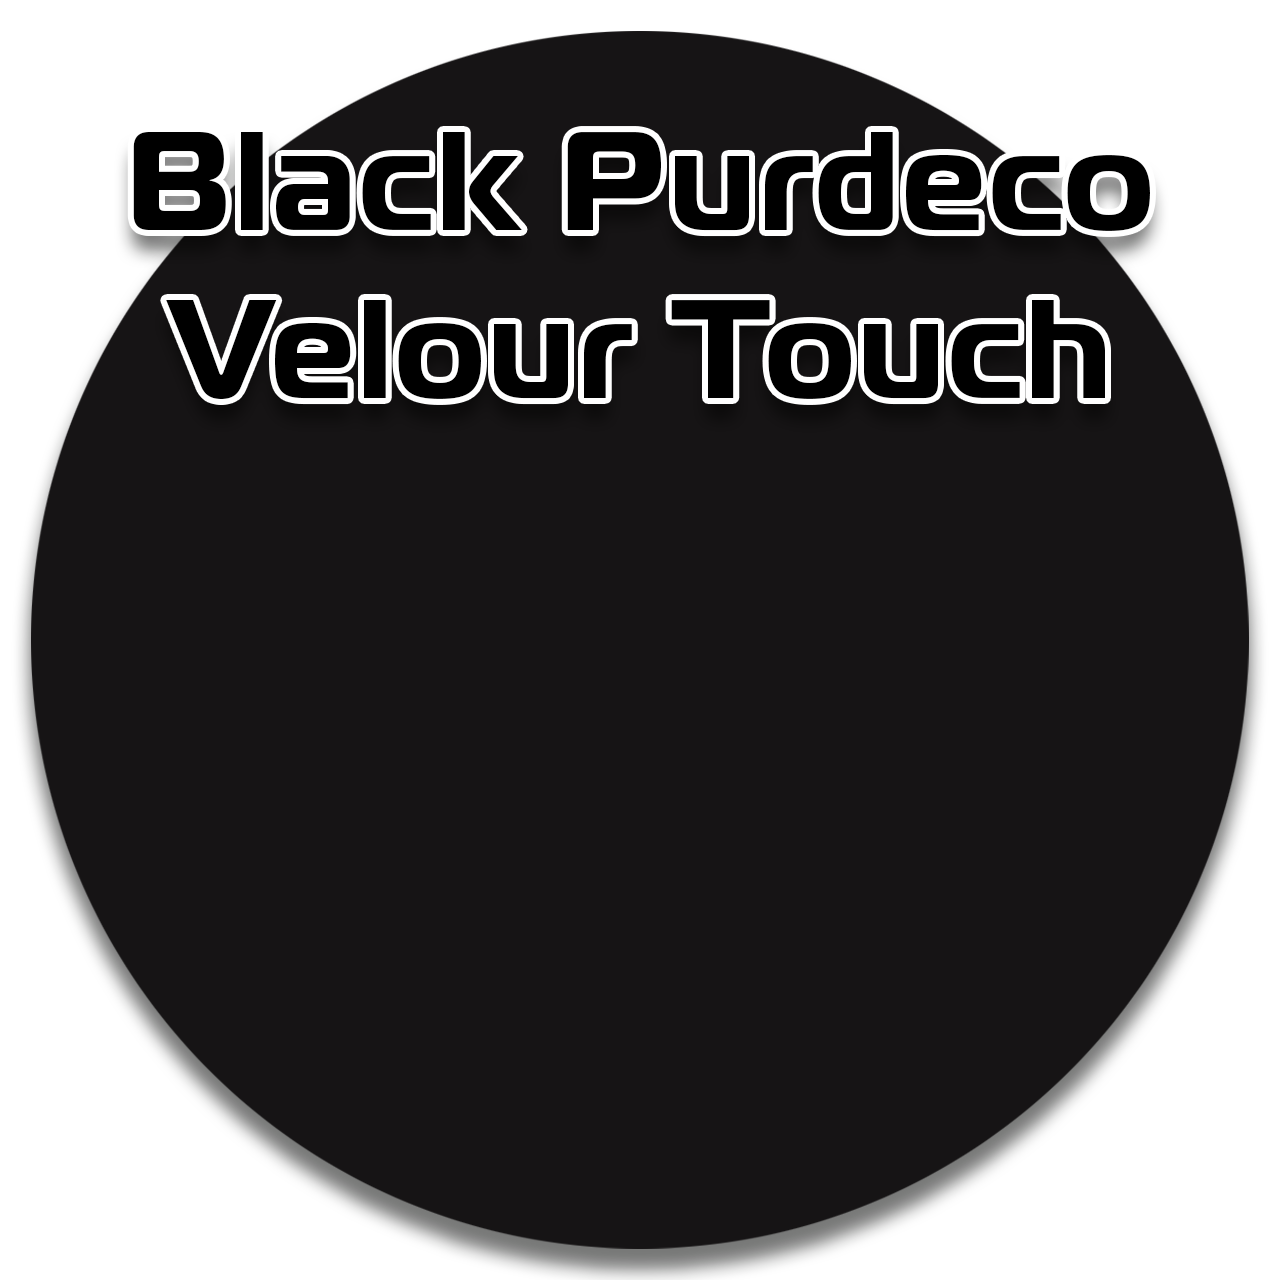 Black Purdeco G2S MDF Velour Touch extreme matte finishes surface is silky to the touch, anti-fingerprint and scratch resistant.